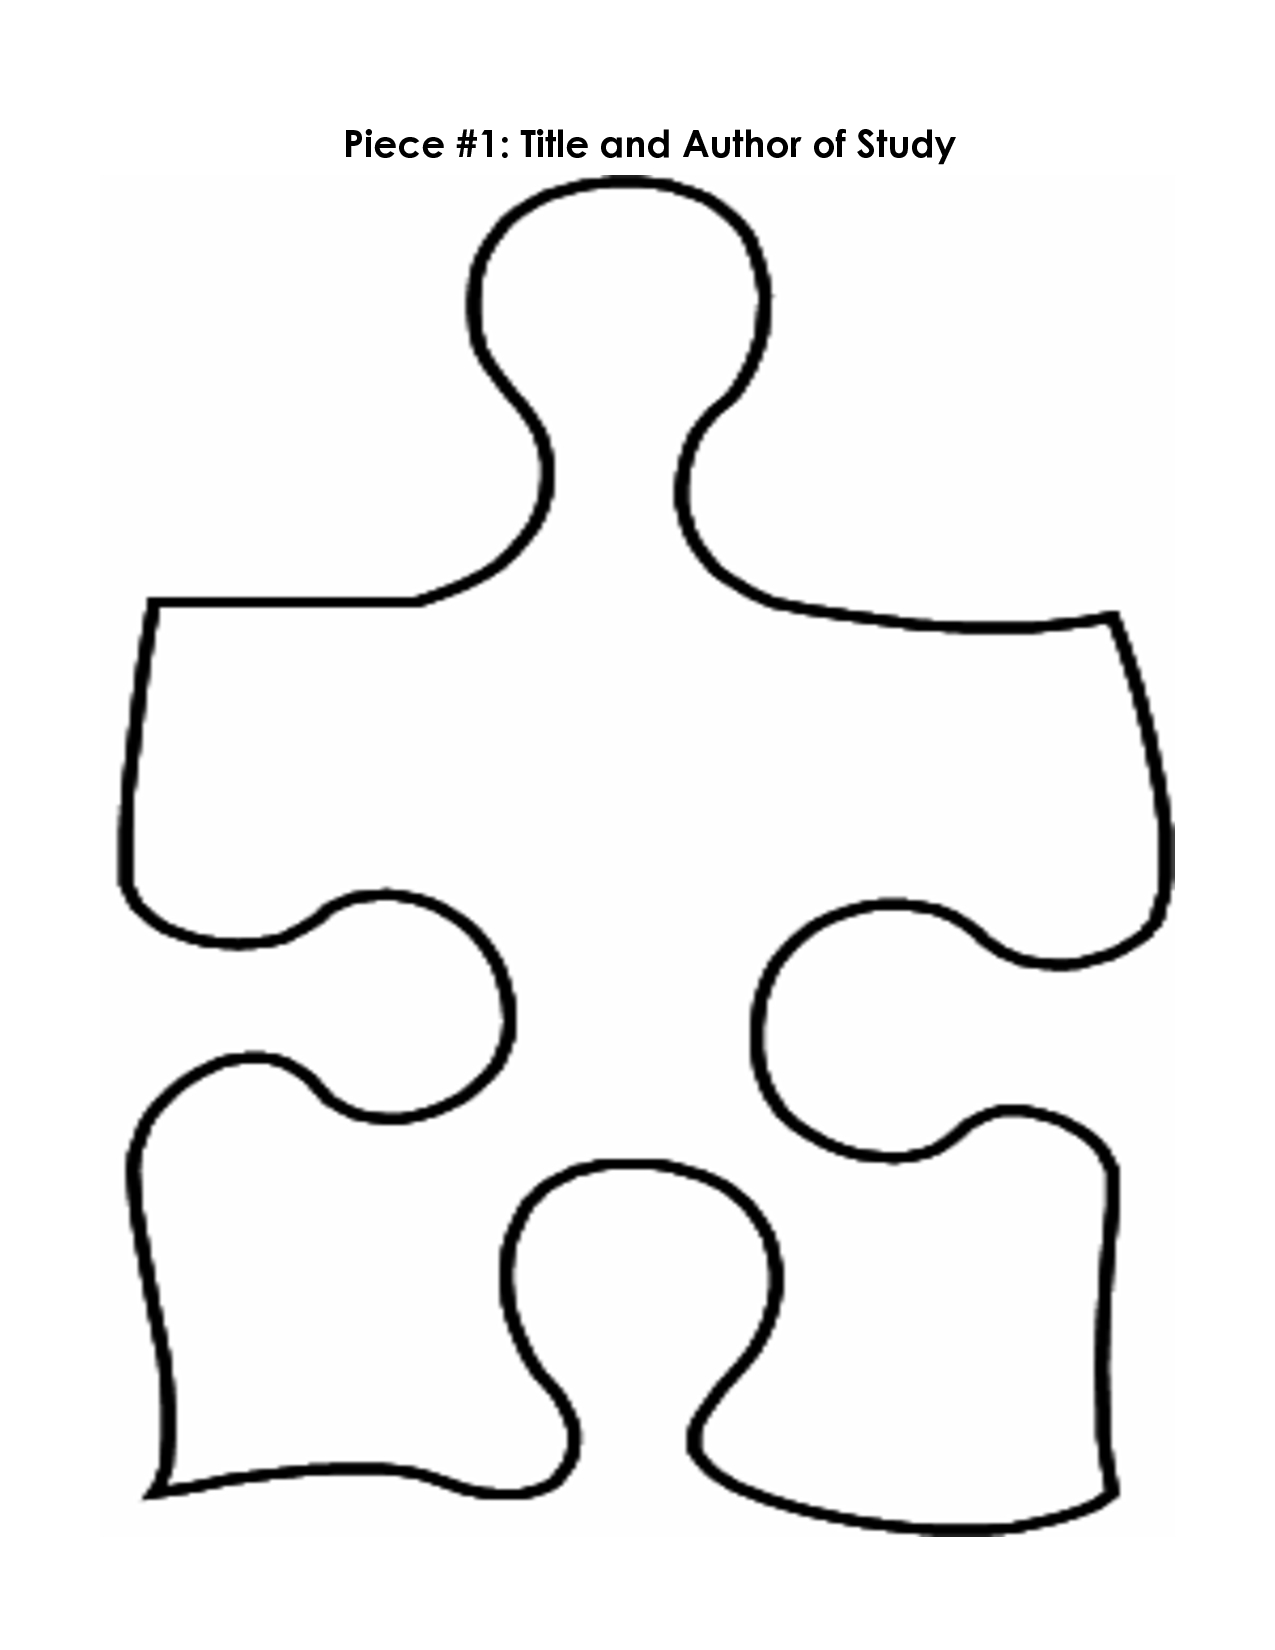 Free Puzzle Pieces Template, Download Free Clip Art, Free Clip Art - Free Blank Printable Puzzle Pieces